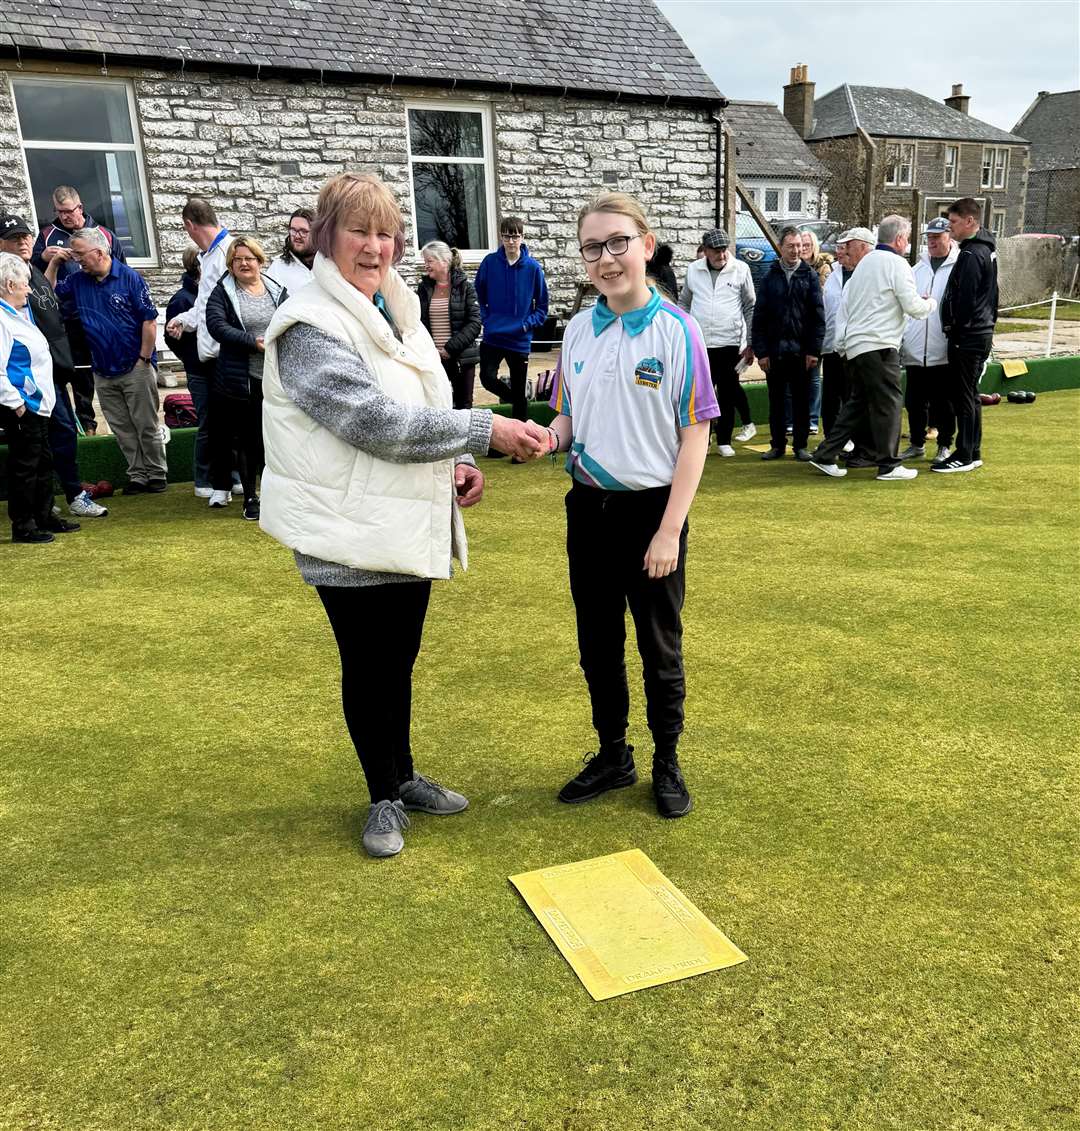 Lybster club president Fran Manners presenting the first jack to the club’s youngest member, Mhairi Kirk. Picture: Tony Draper-Rickards